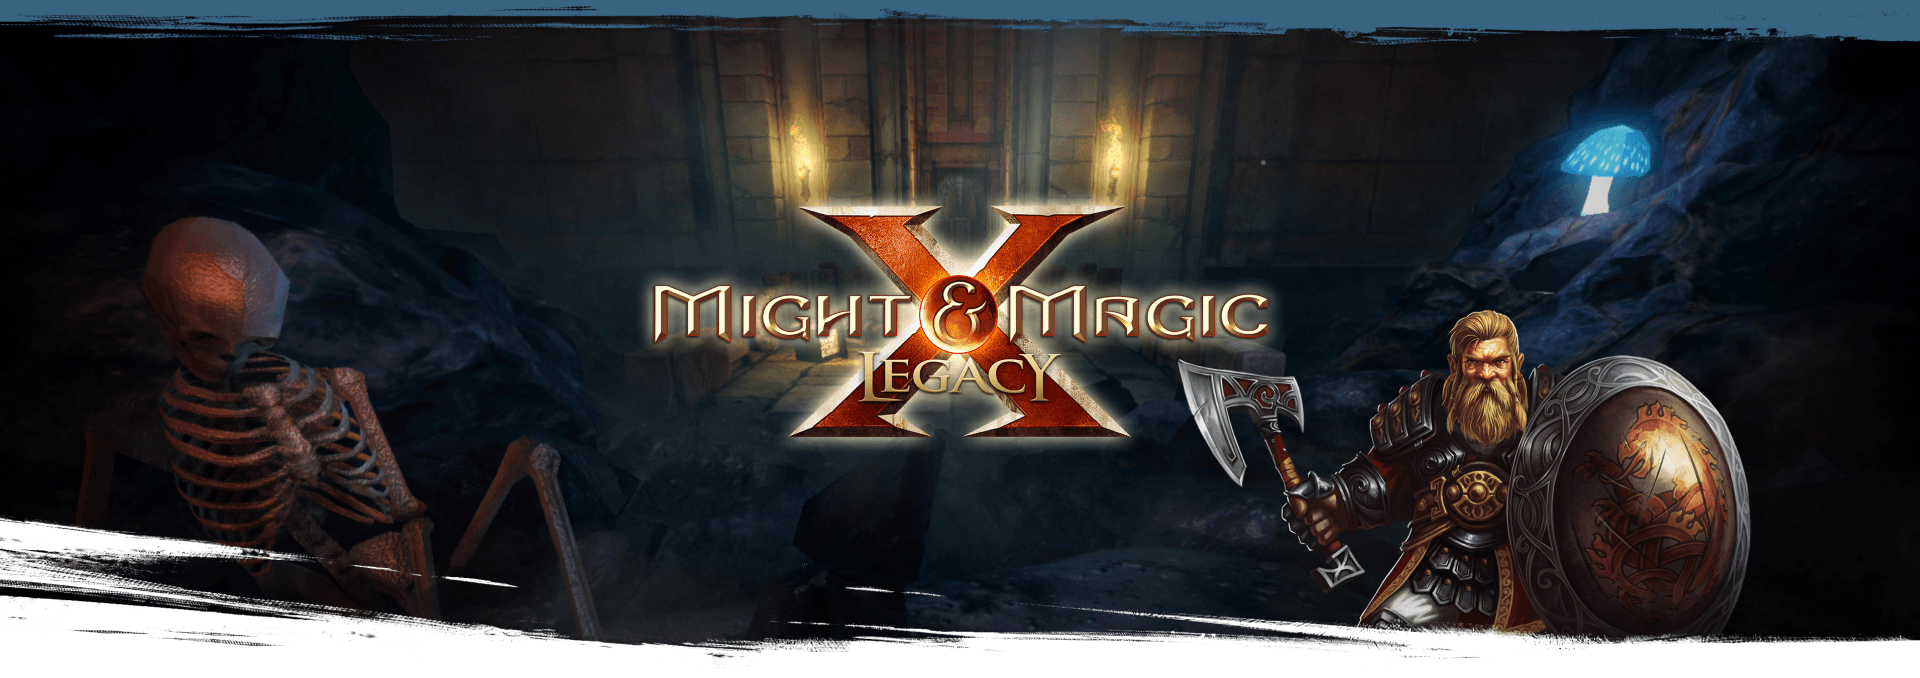 A dwarven warrior in a dungeon with the Might and Magic X: Legacy logo.